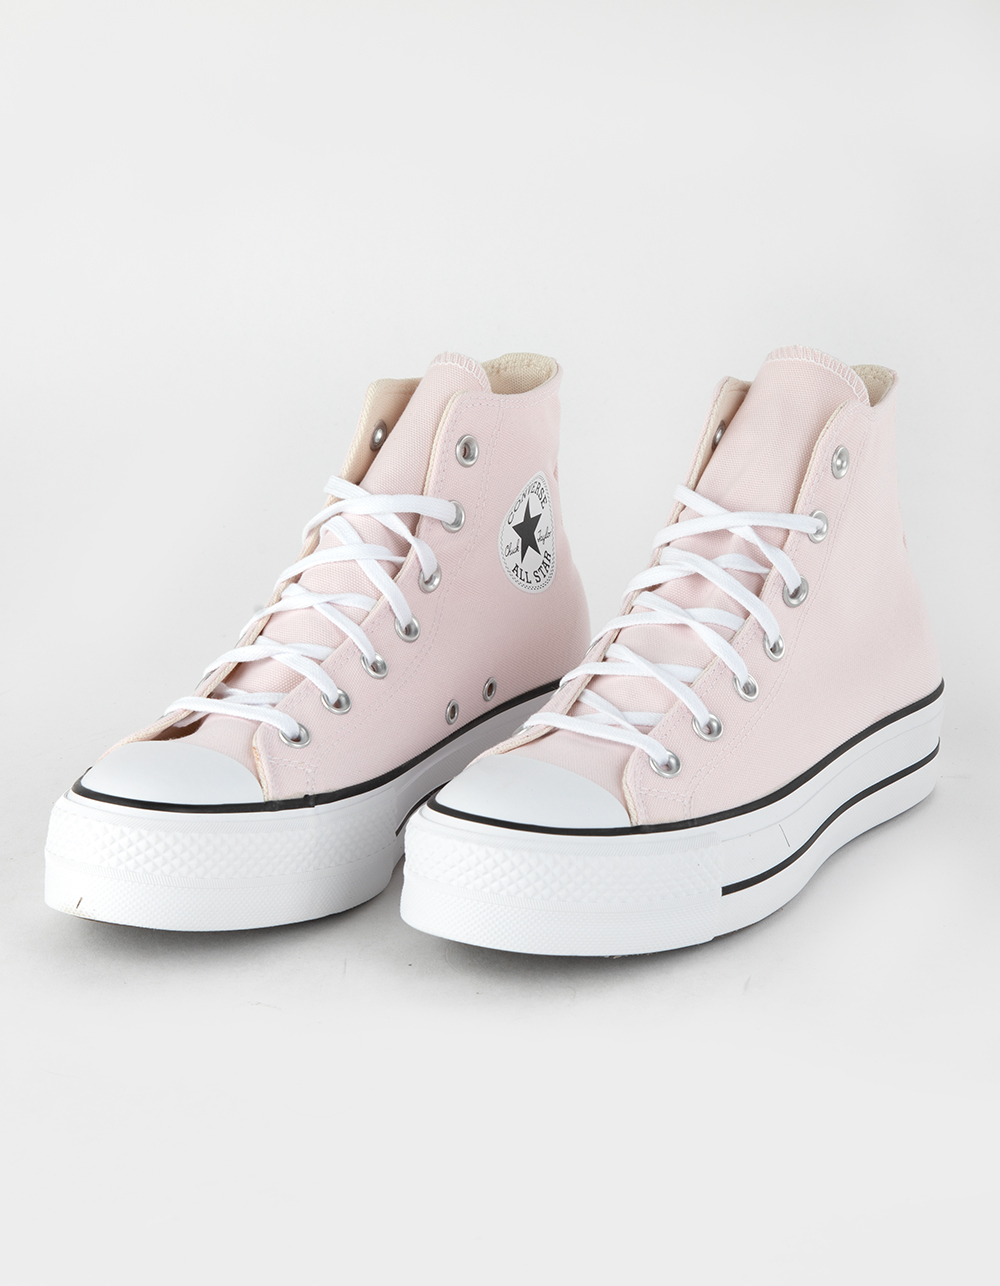 Neon pink High top vans  Sneakers fashion, Sneaker boots, Cute shoes